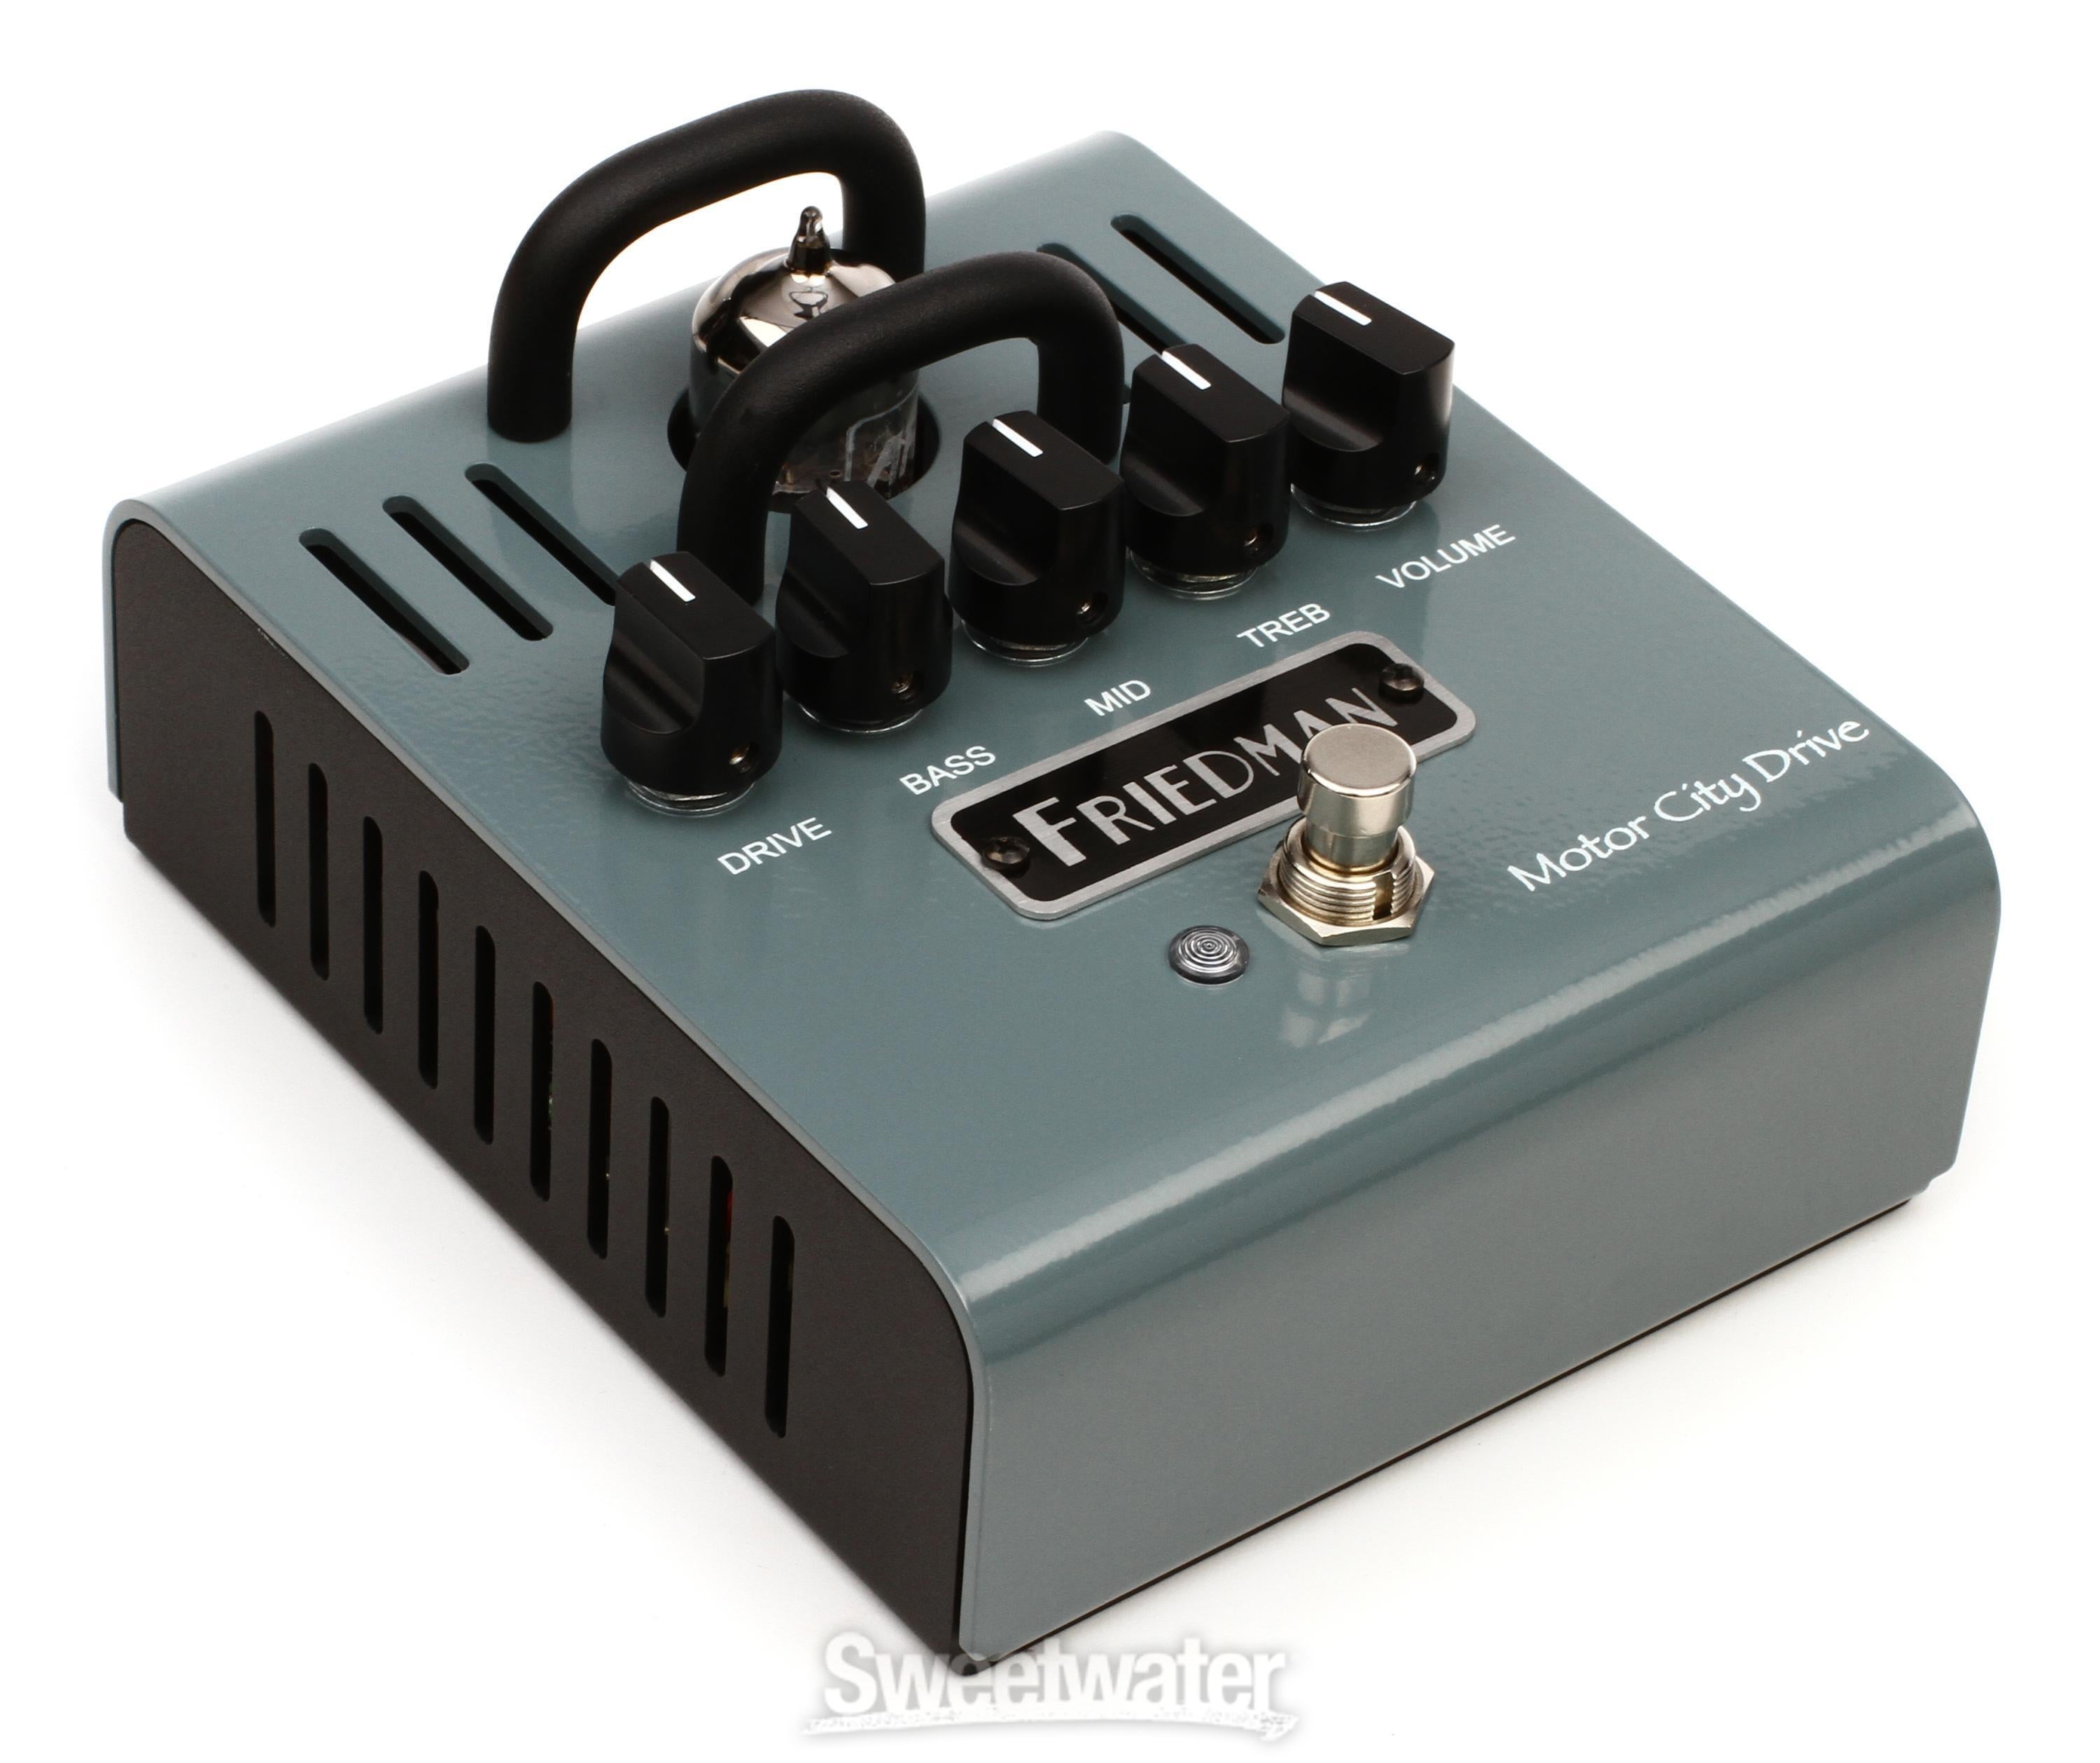 Friedman Motor City Drive - 12AX7 Tube Overdrive Pedal | Sweetwater